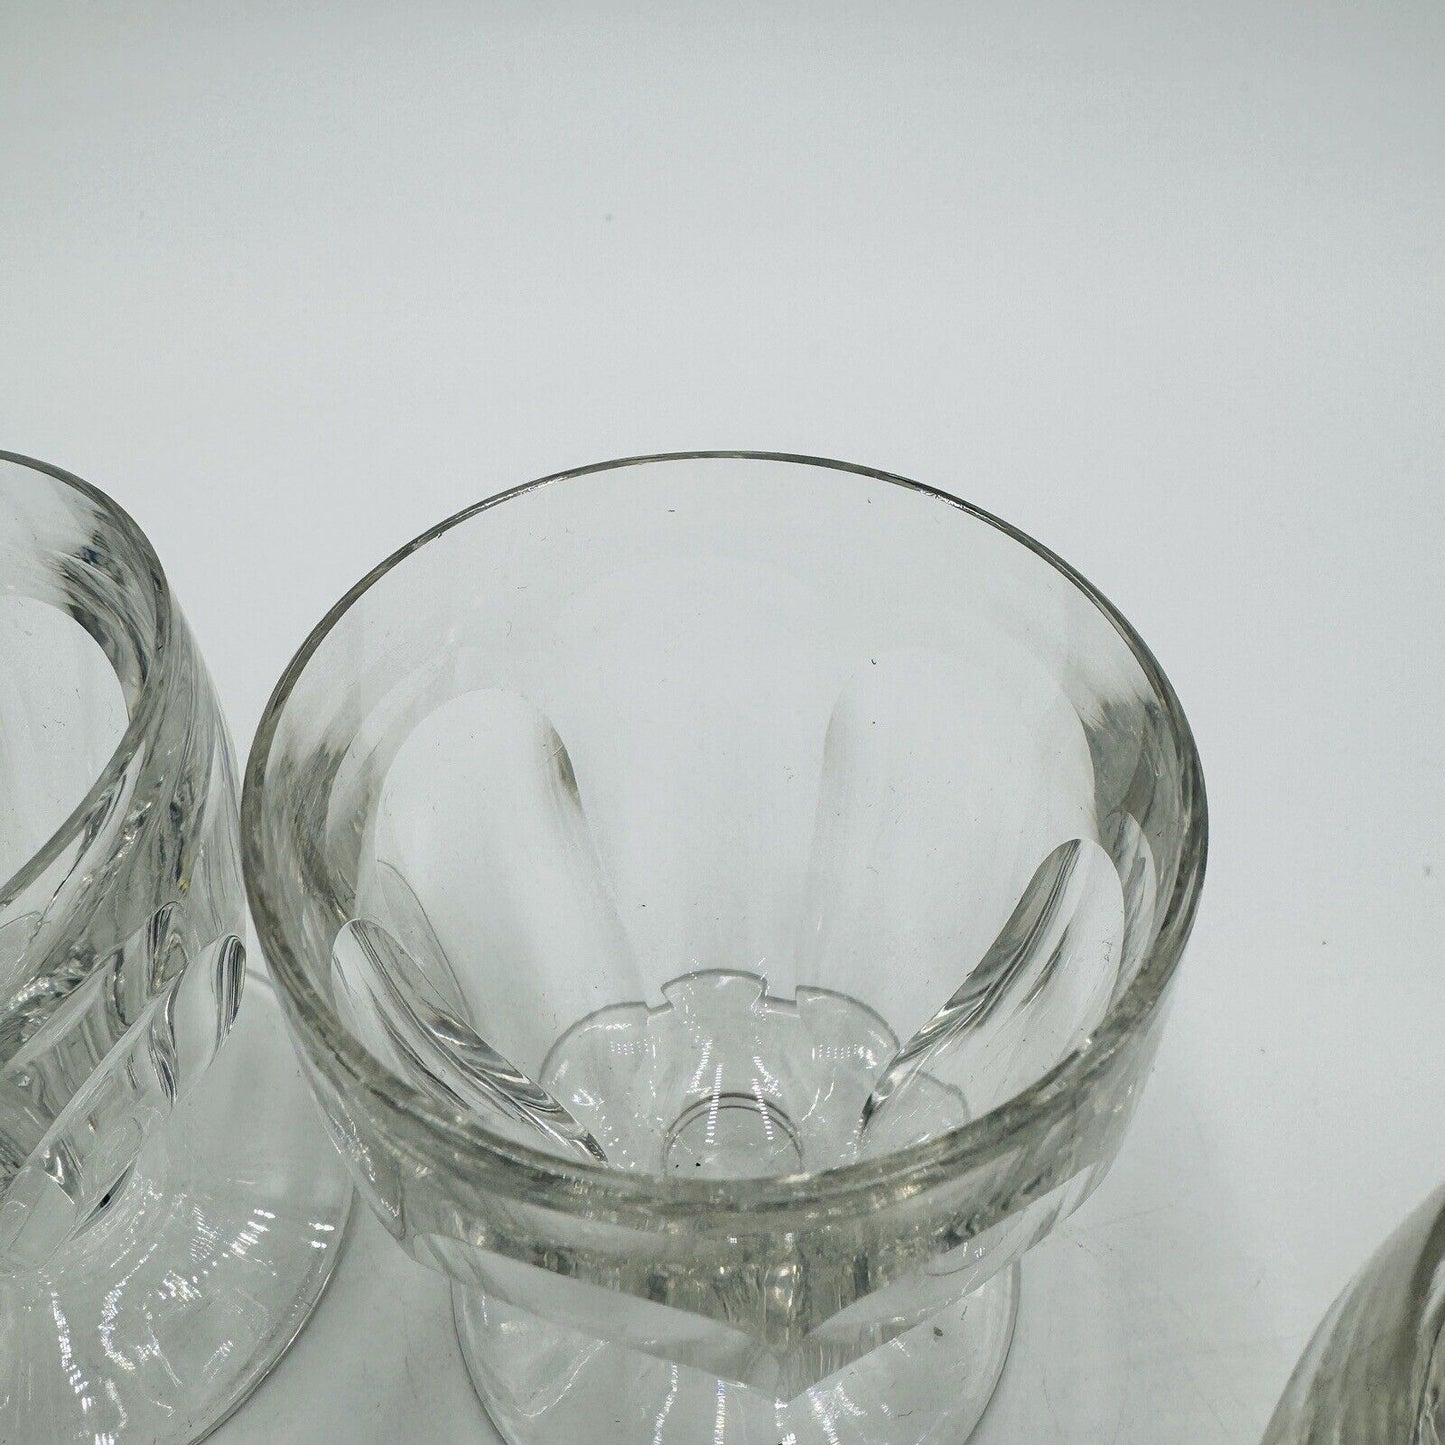 BACCARAT France Crystal Tallyrand White Wine 3 3/8” Set 4 Pieces Cordial Glasses